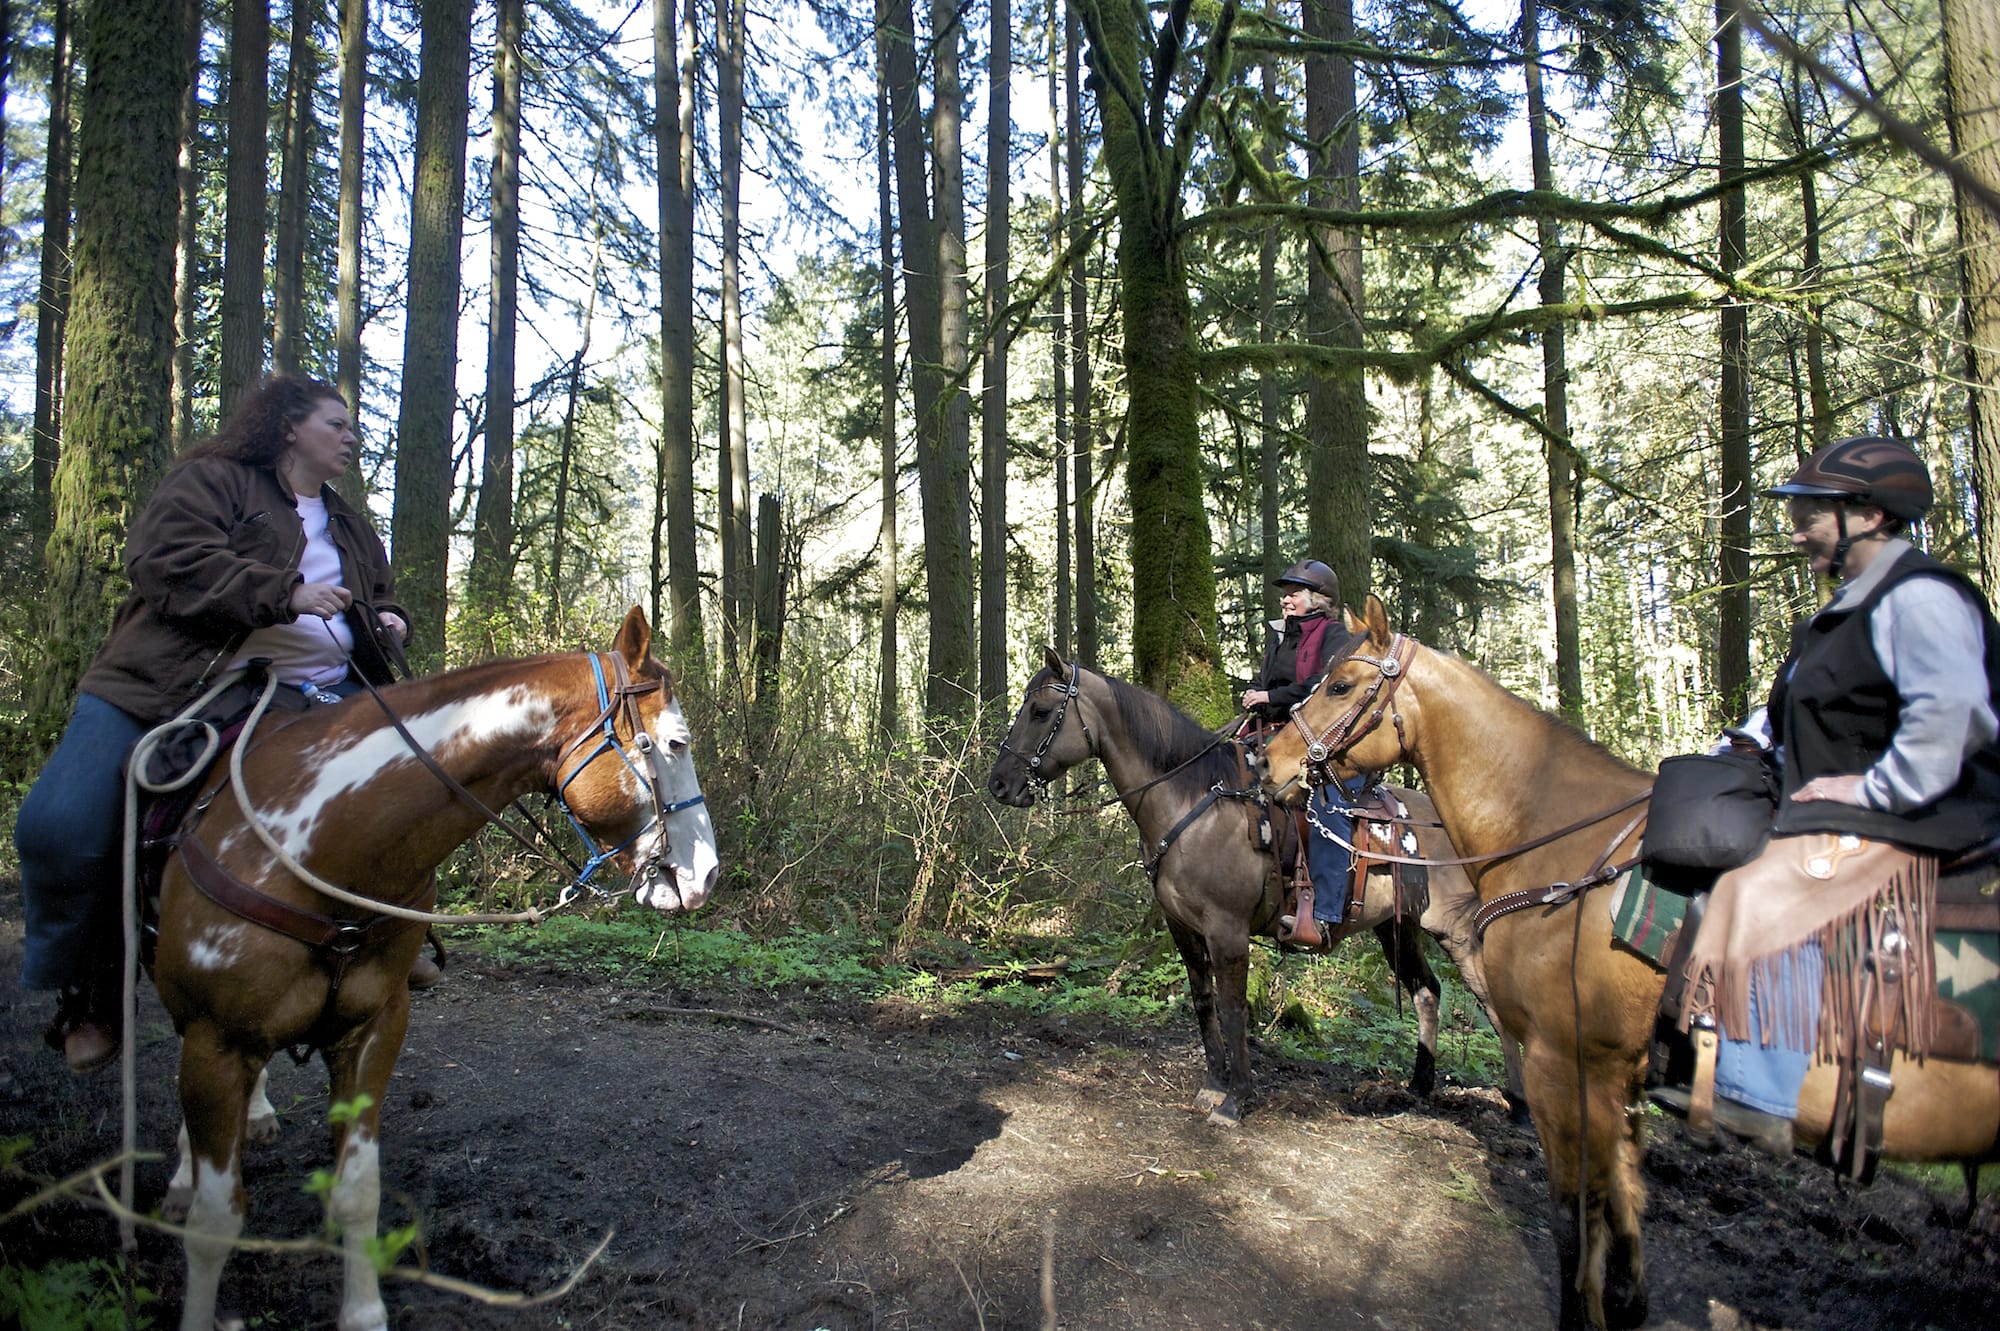 From left, Bobbi Luper, Anita Will and Betty Espey ride the Whipple Creek Park Trail on March 22.